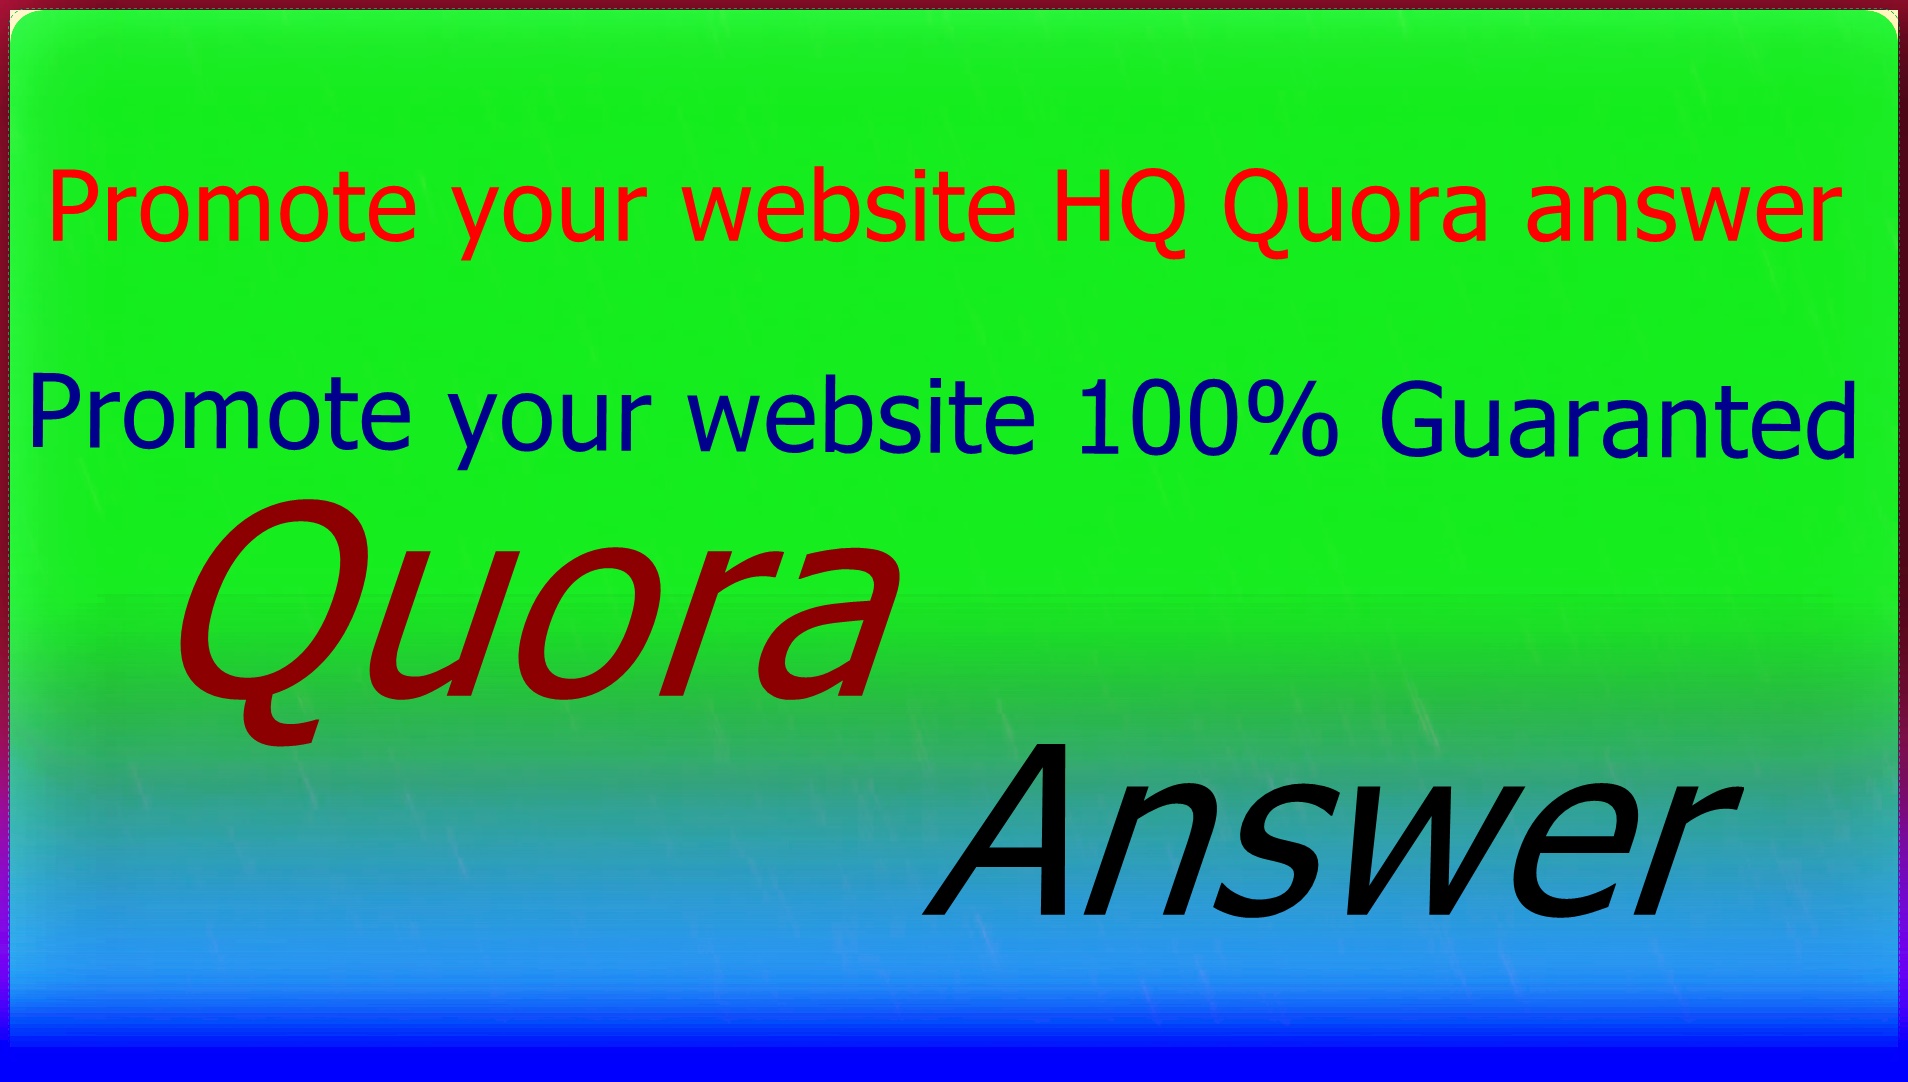 promote your website 35 HQ Quora answer 